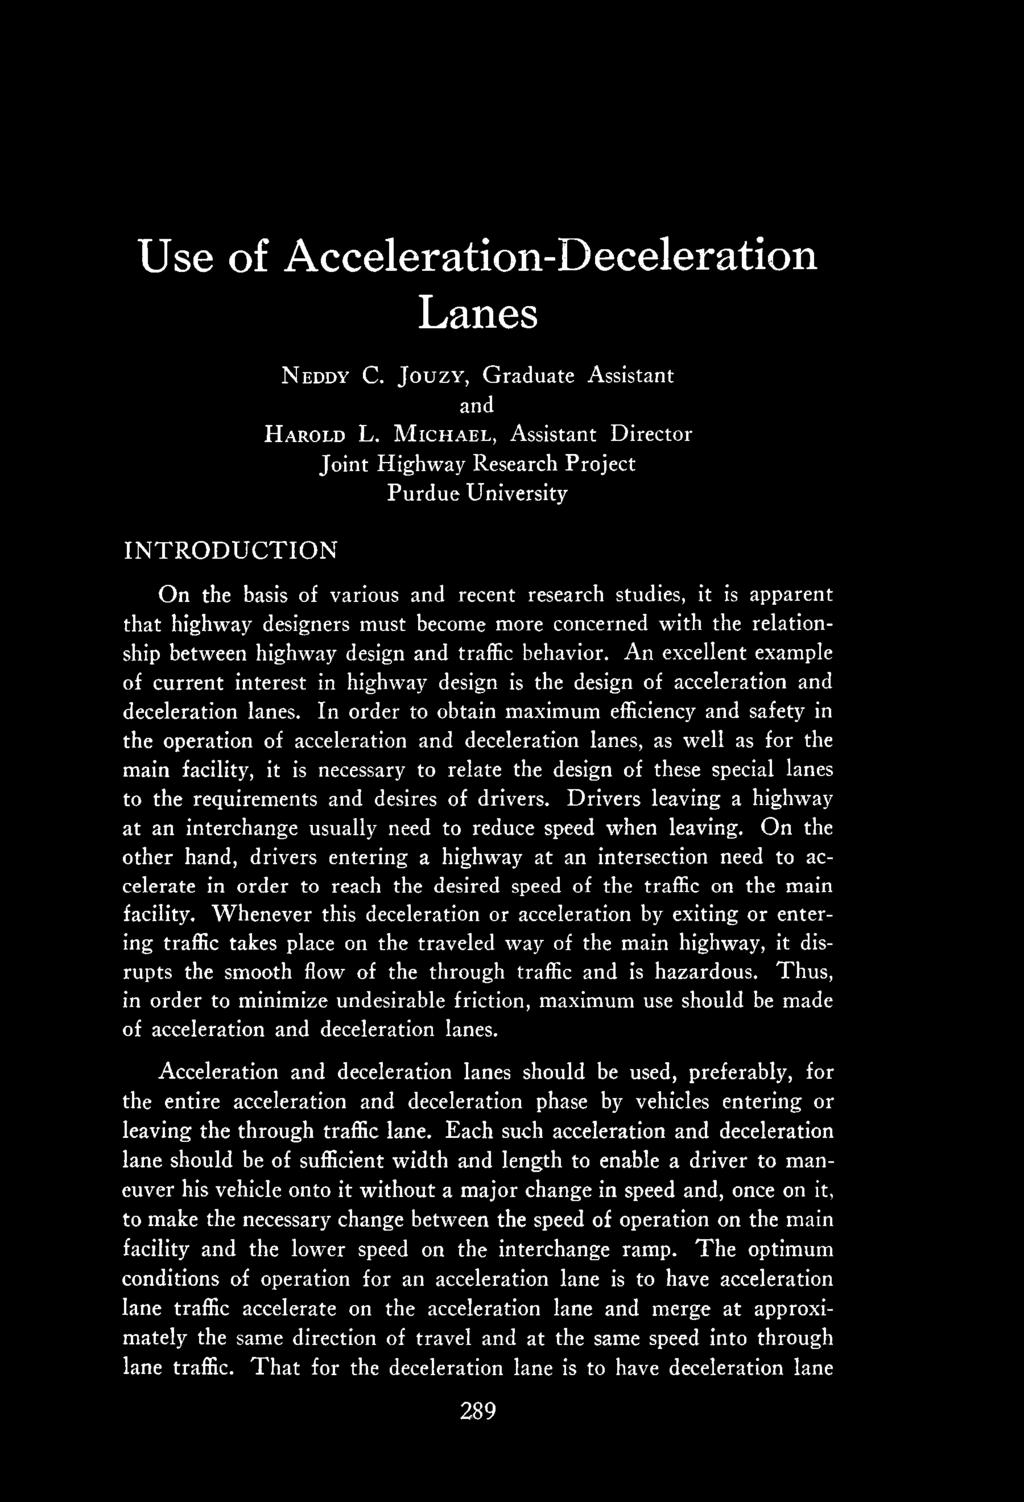 with the relationship between highway design and traffic behavior. An excellent example of current interest in highway design is the design of acceleration and deceleration lanes.